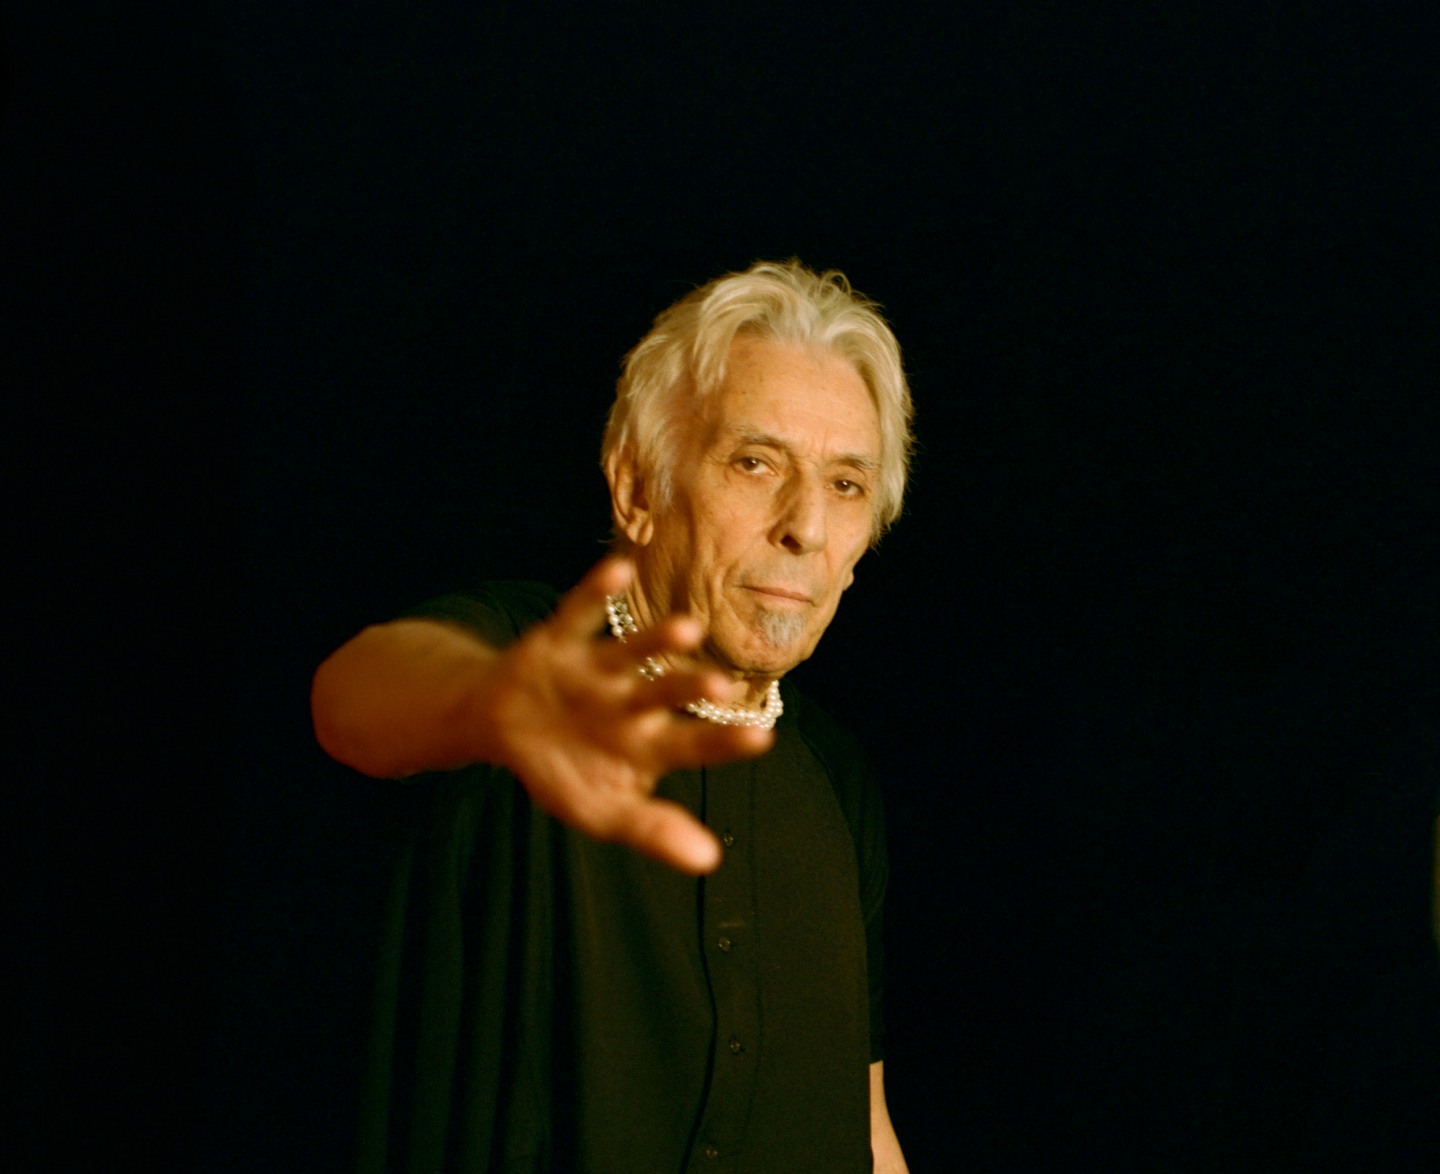 John Cale remains in flux